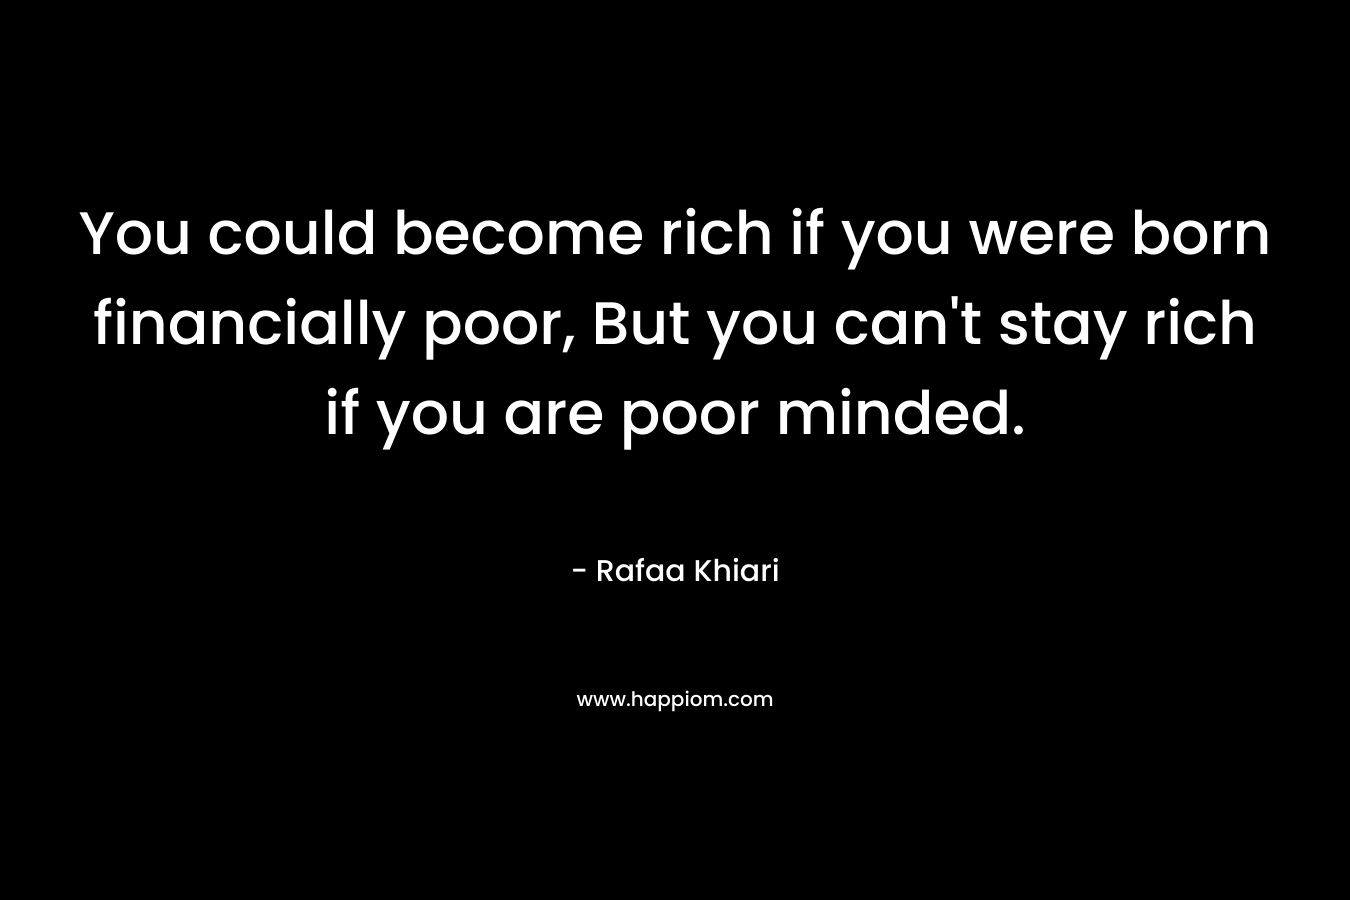 You could become rich if you were born financially poor, But you can't stay rich if you are poor minded.